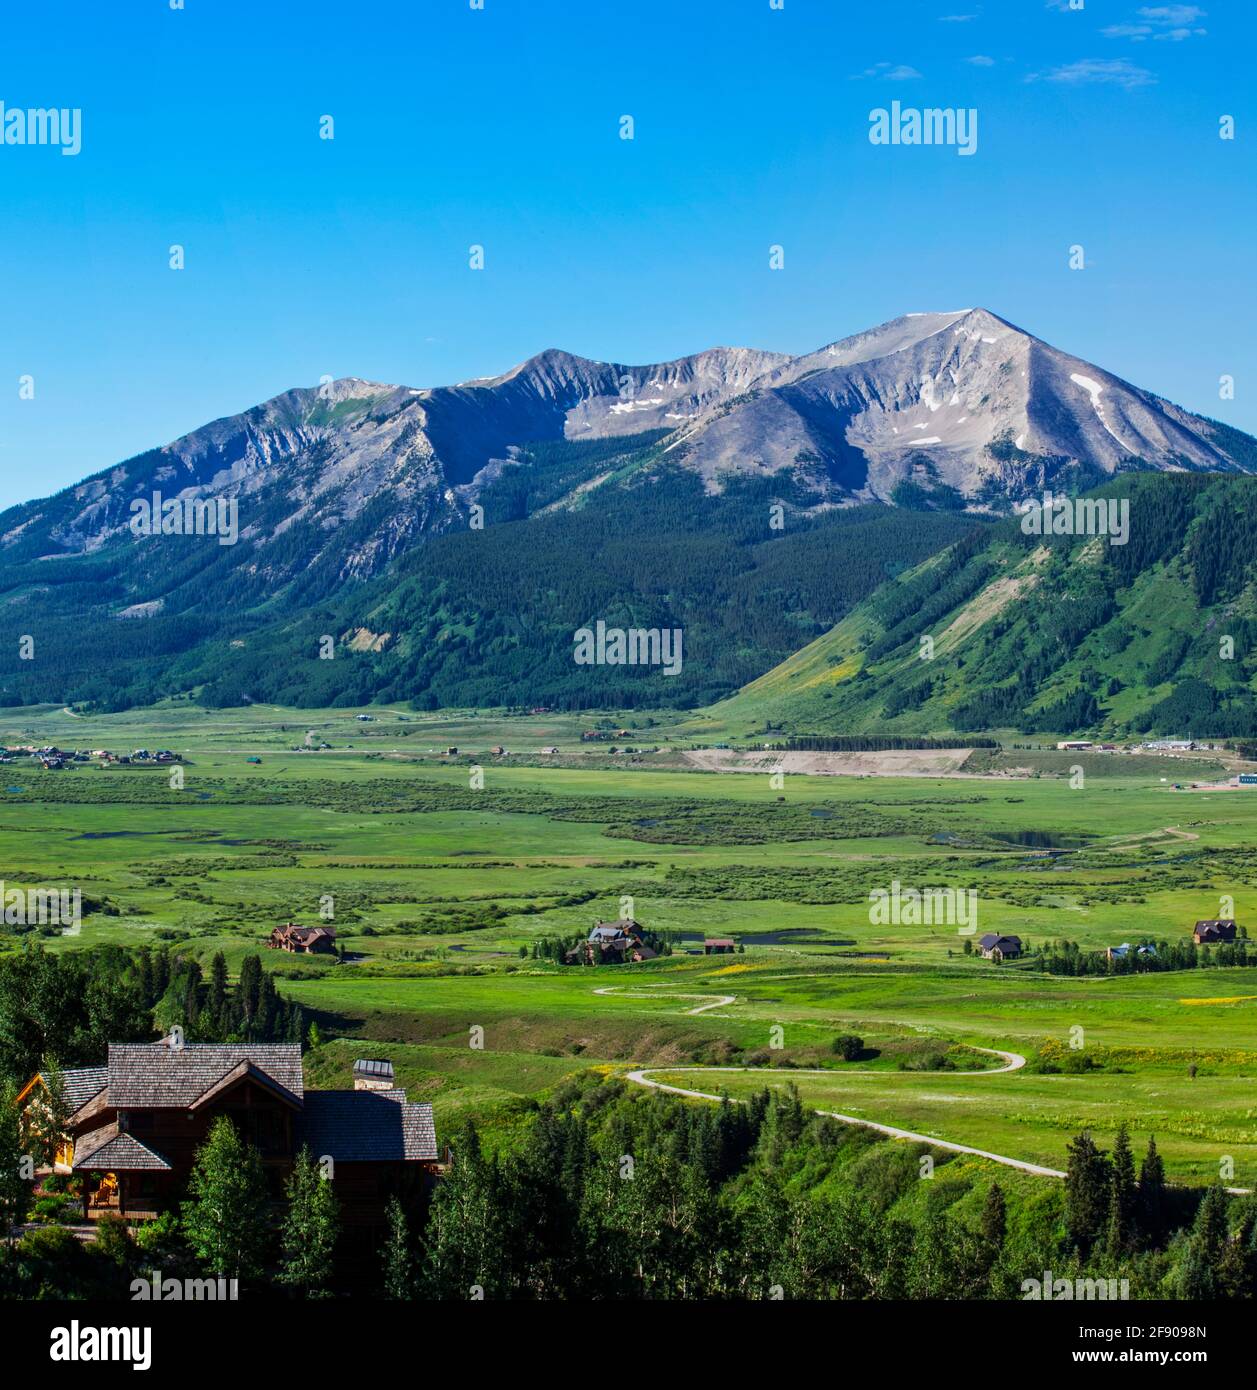 Mountain and valley, Crested Butte, Colorado, USA Stock Photo